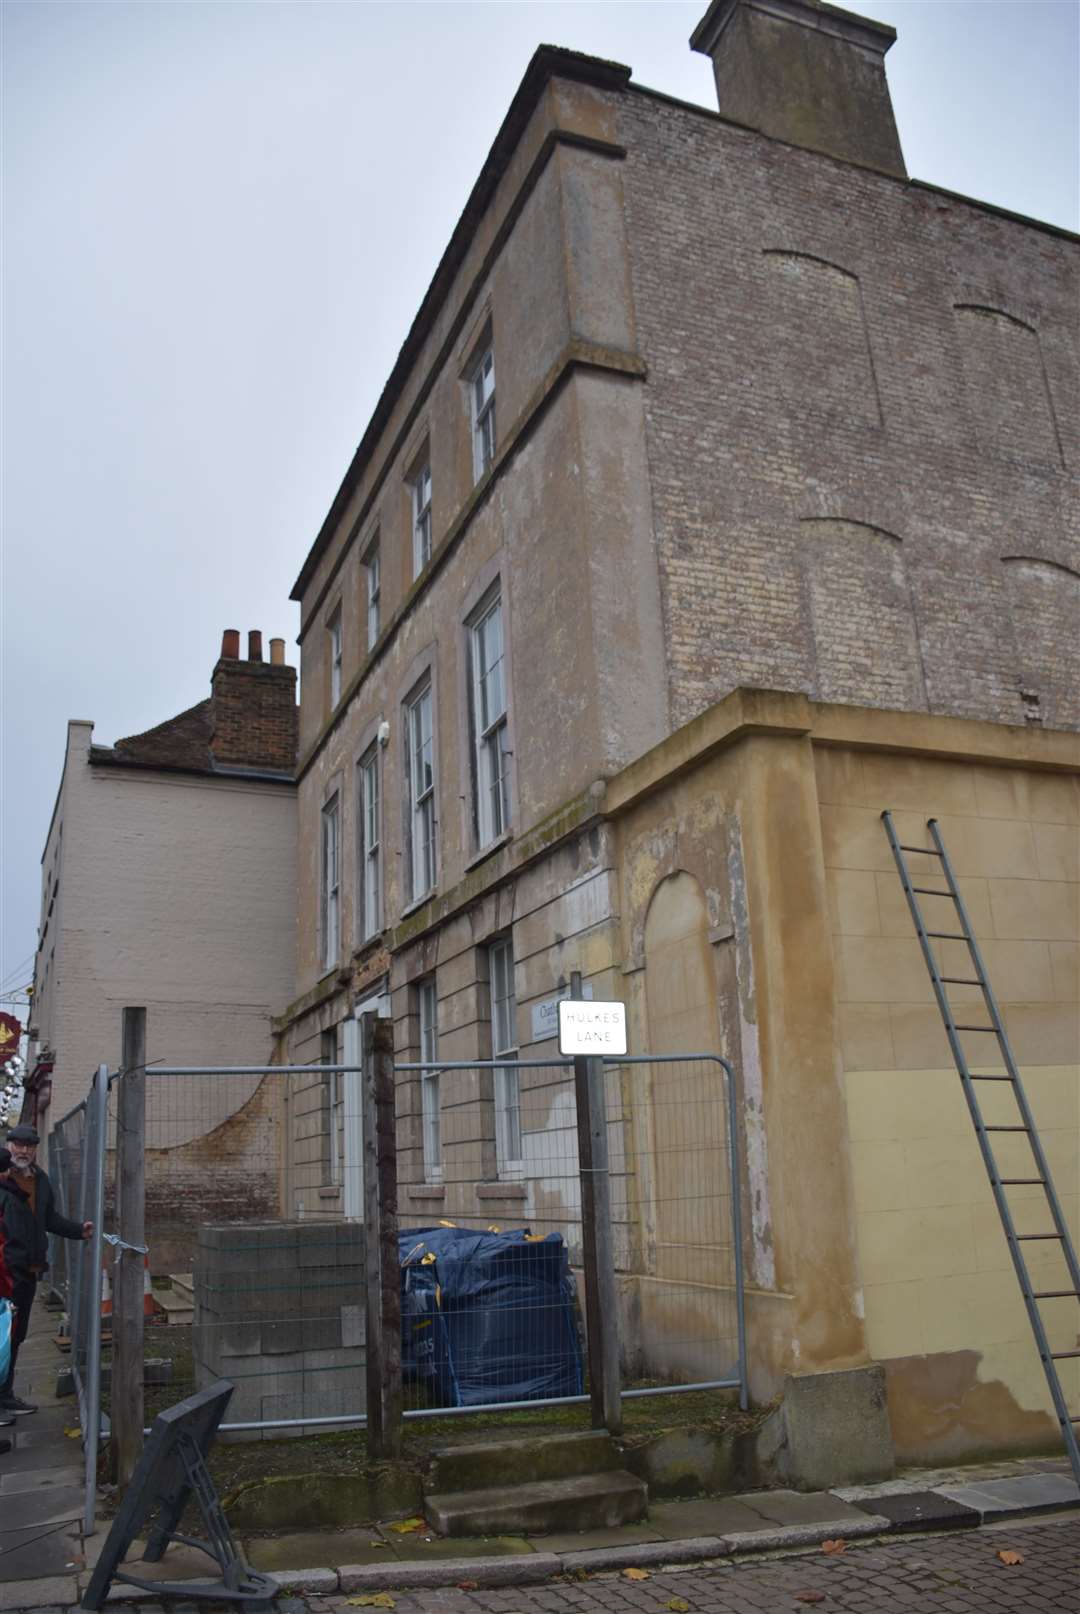 The shop front of the building before the project began to re-build the original front porch. Photo: Sheila Featherstone